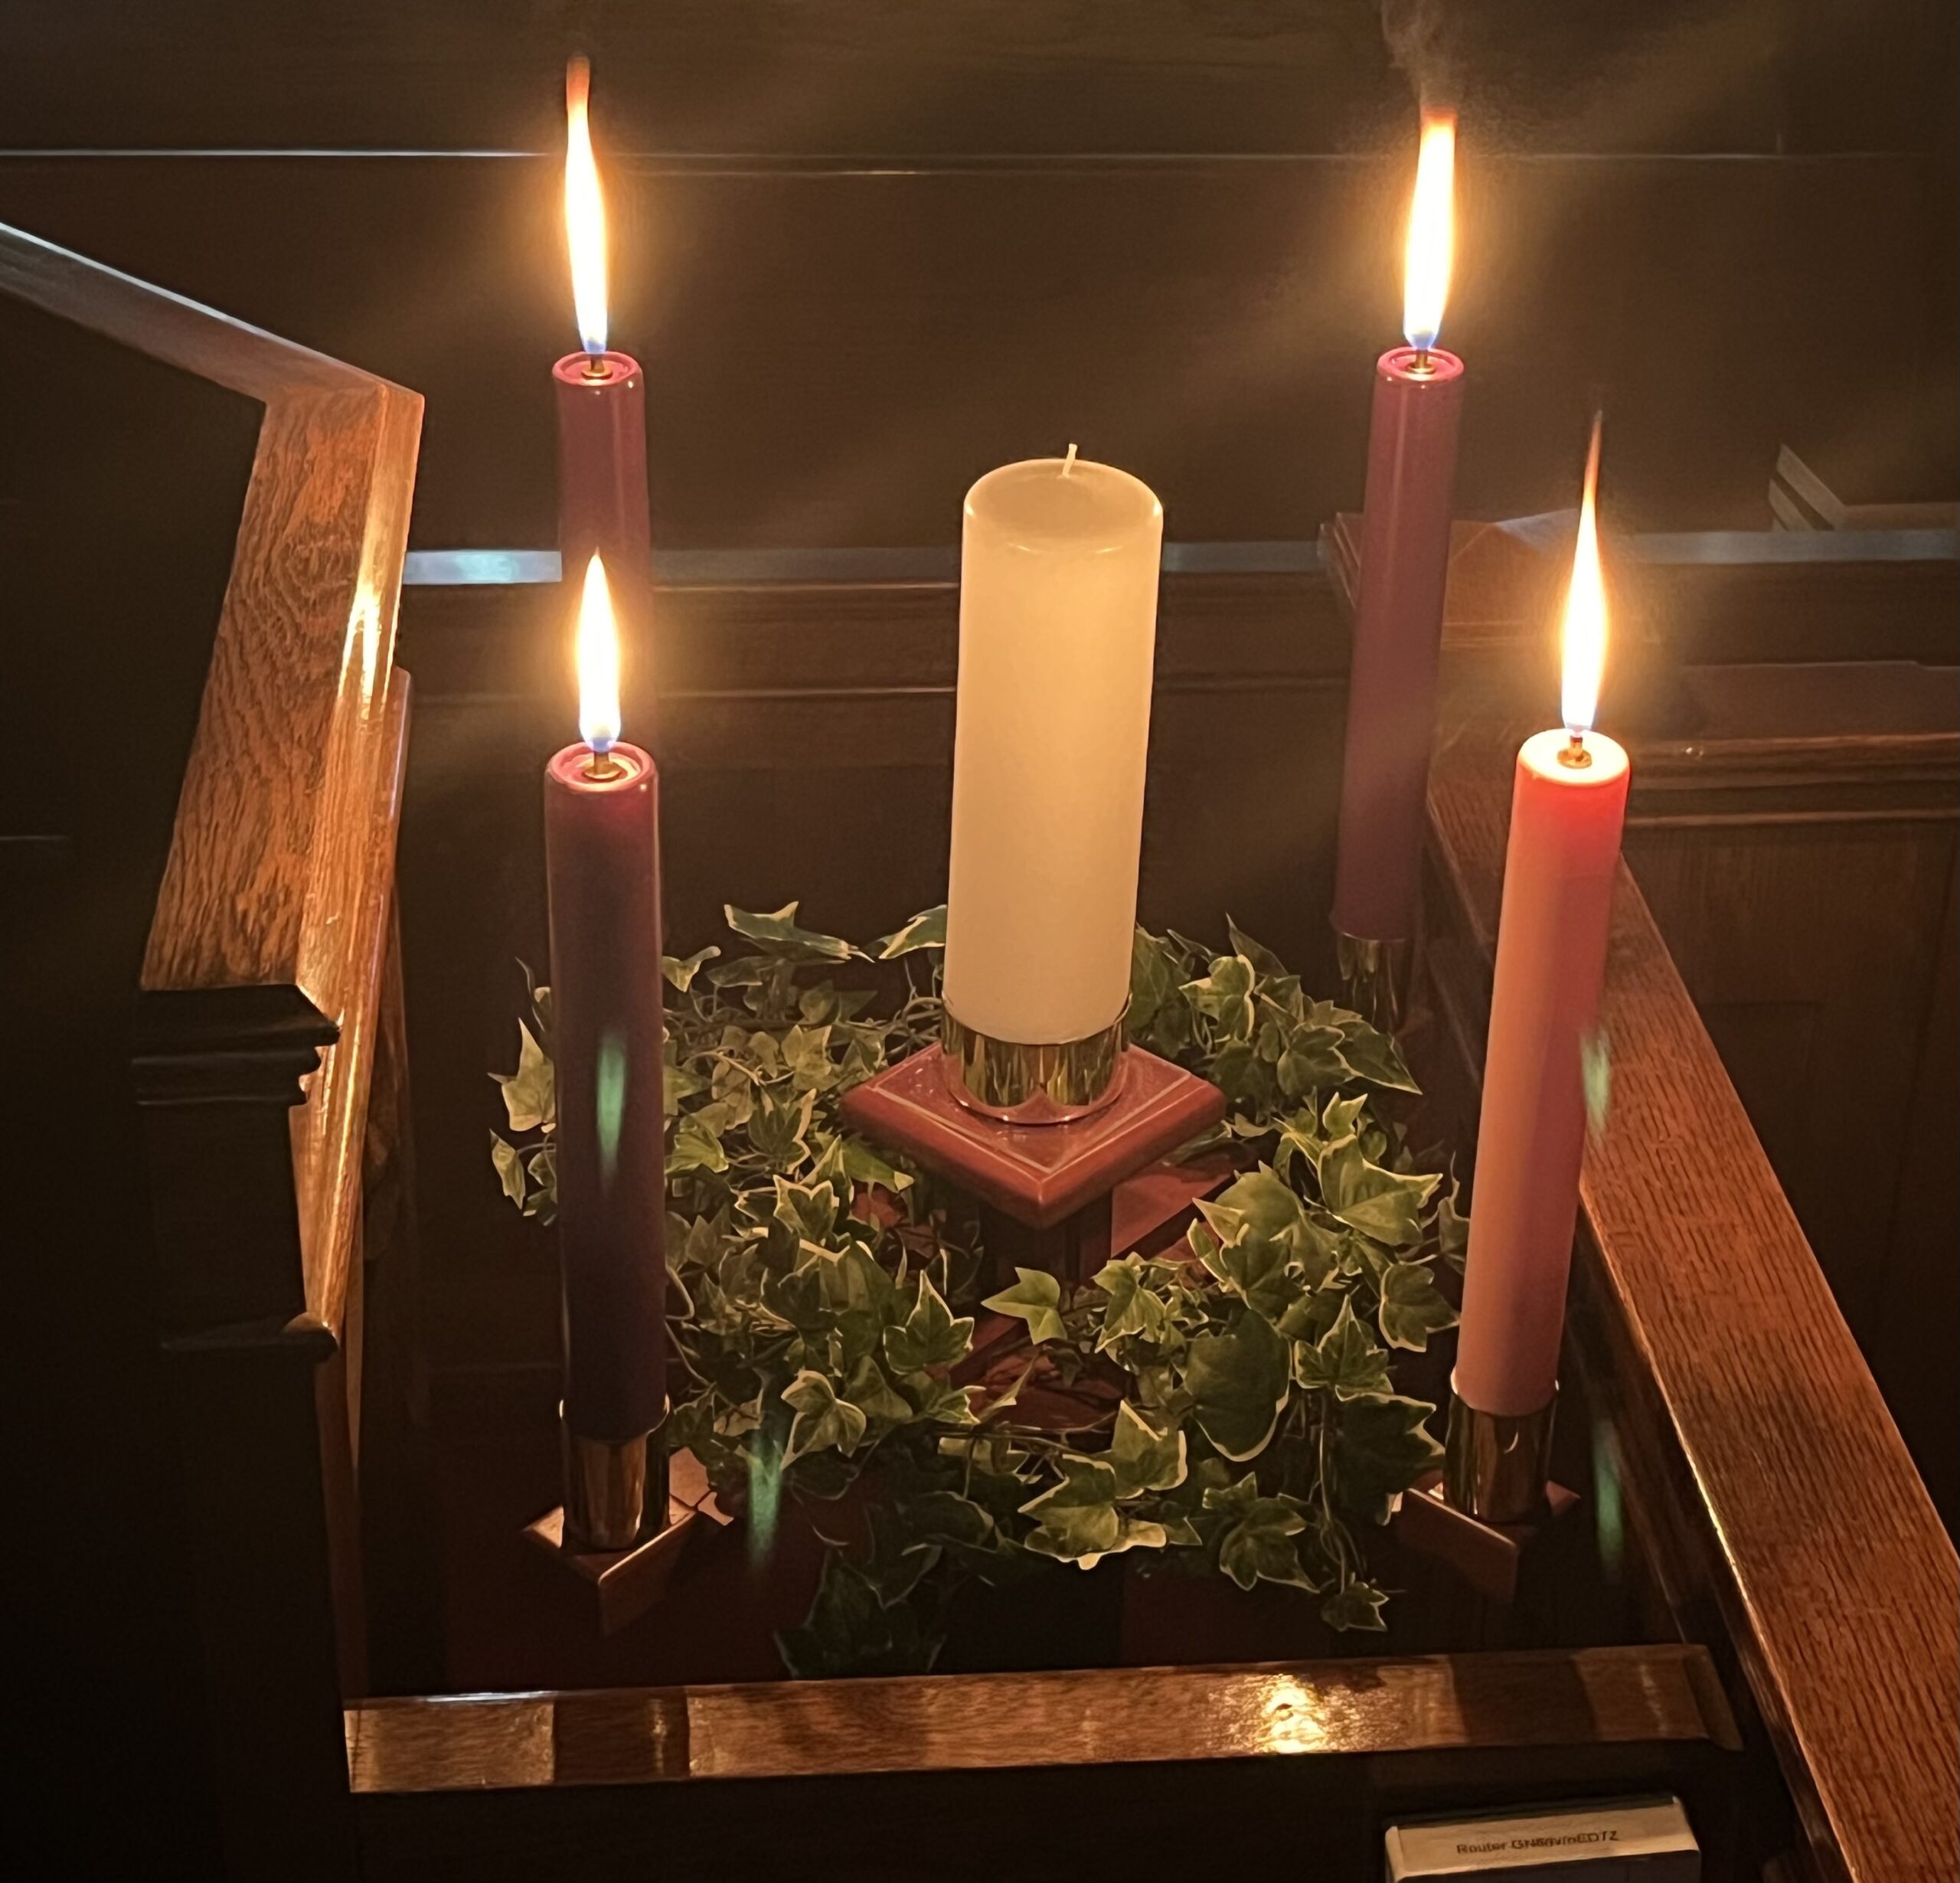 4 lit candles on advent wreath